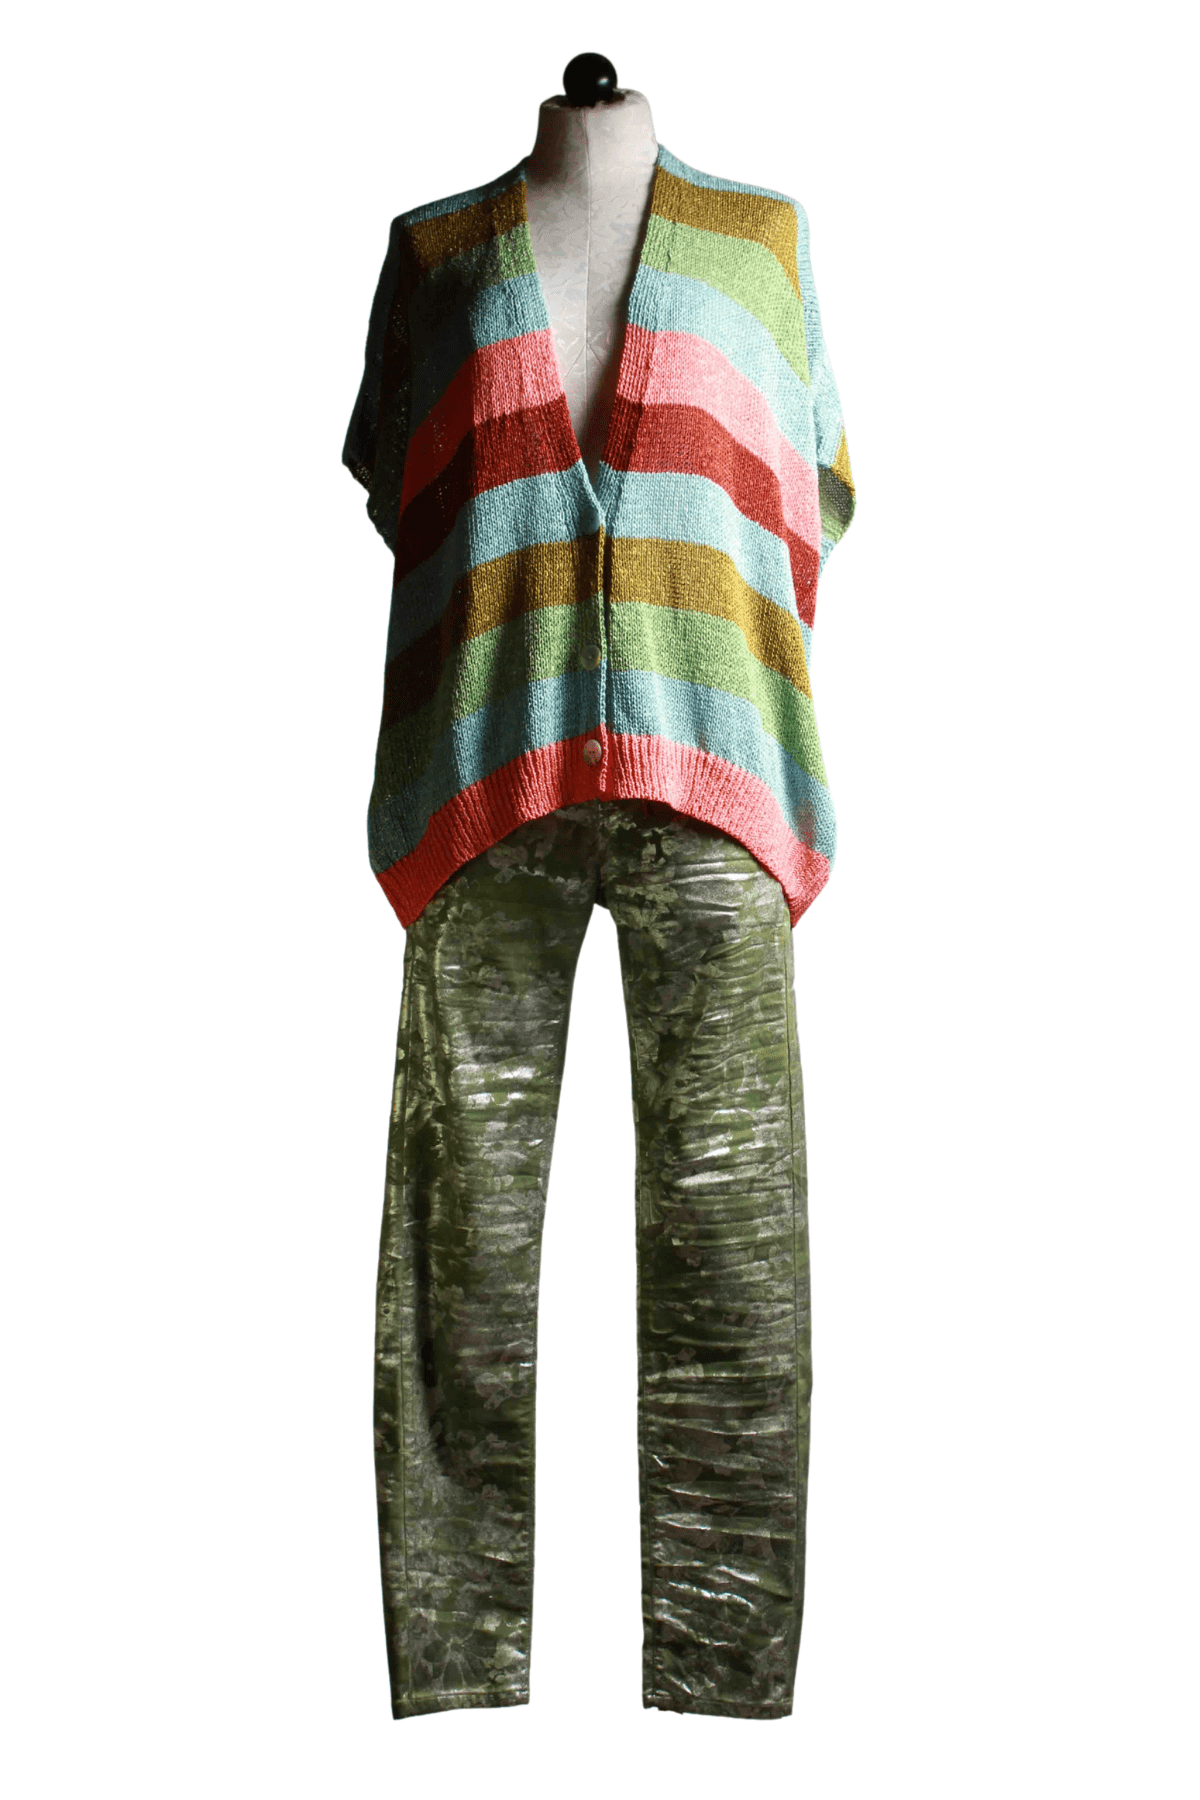 Multi colored Horizon striped button front drop shoulder cardigan/poncho by Alembika paired with metallic drawstring jeans